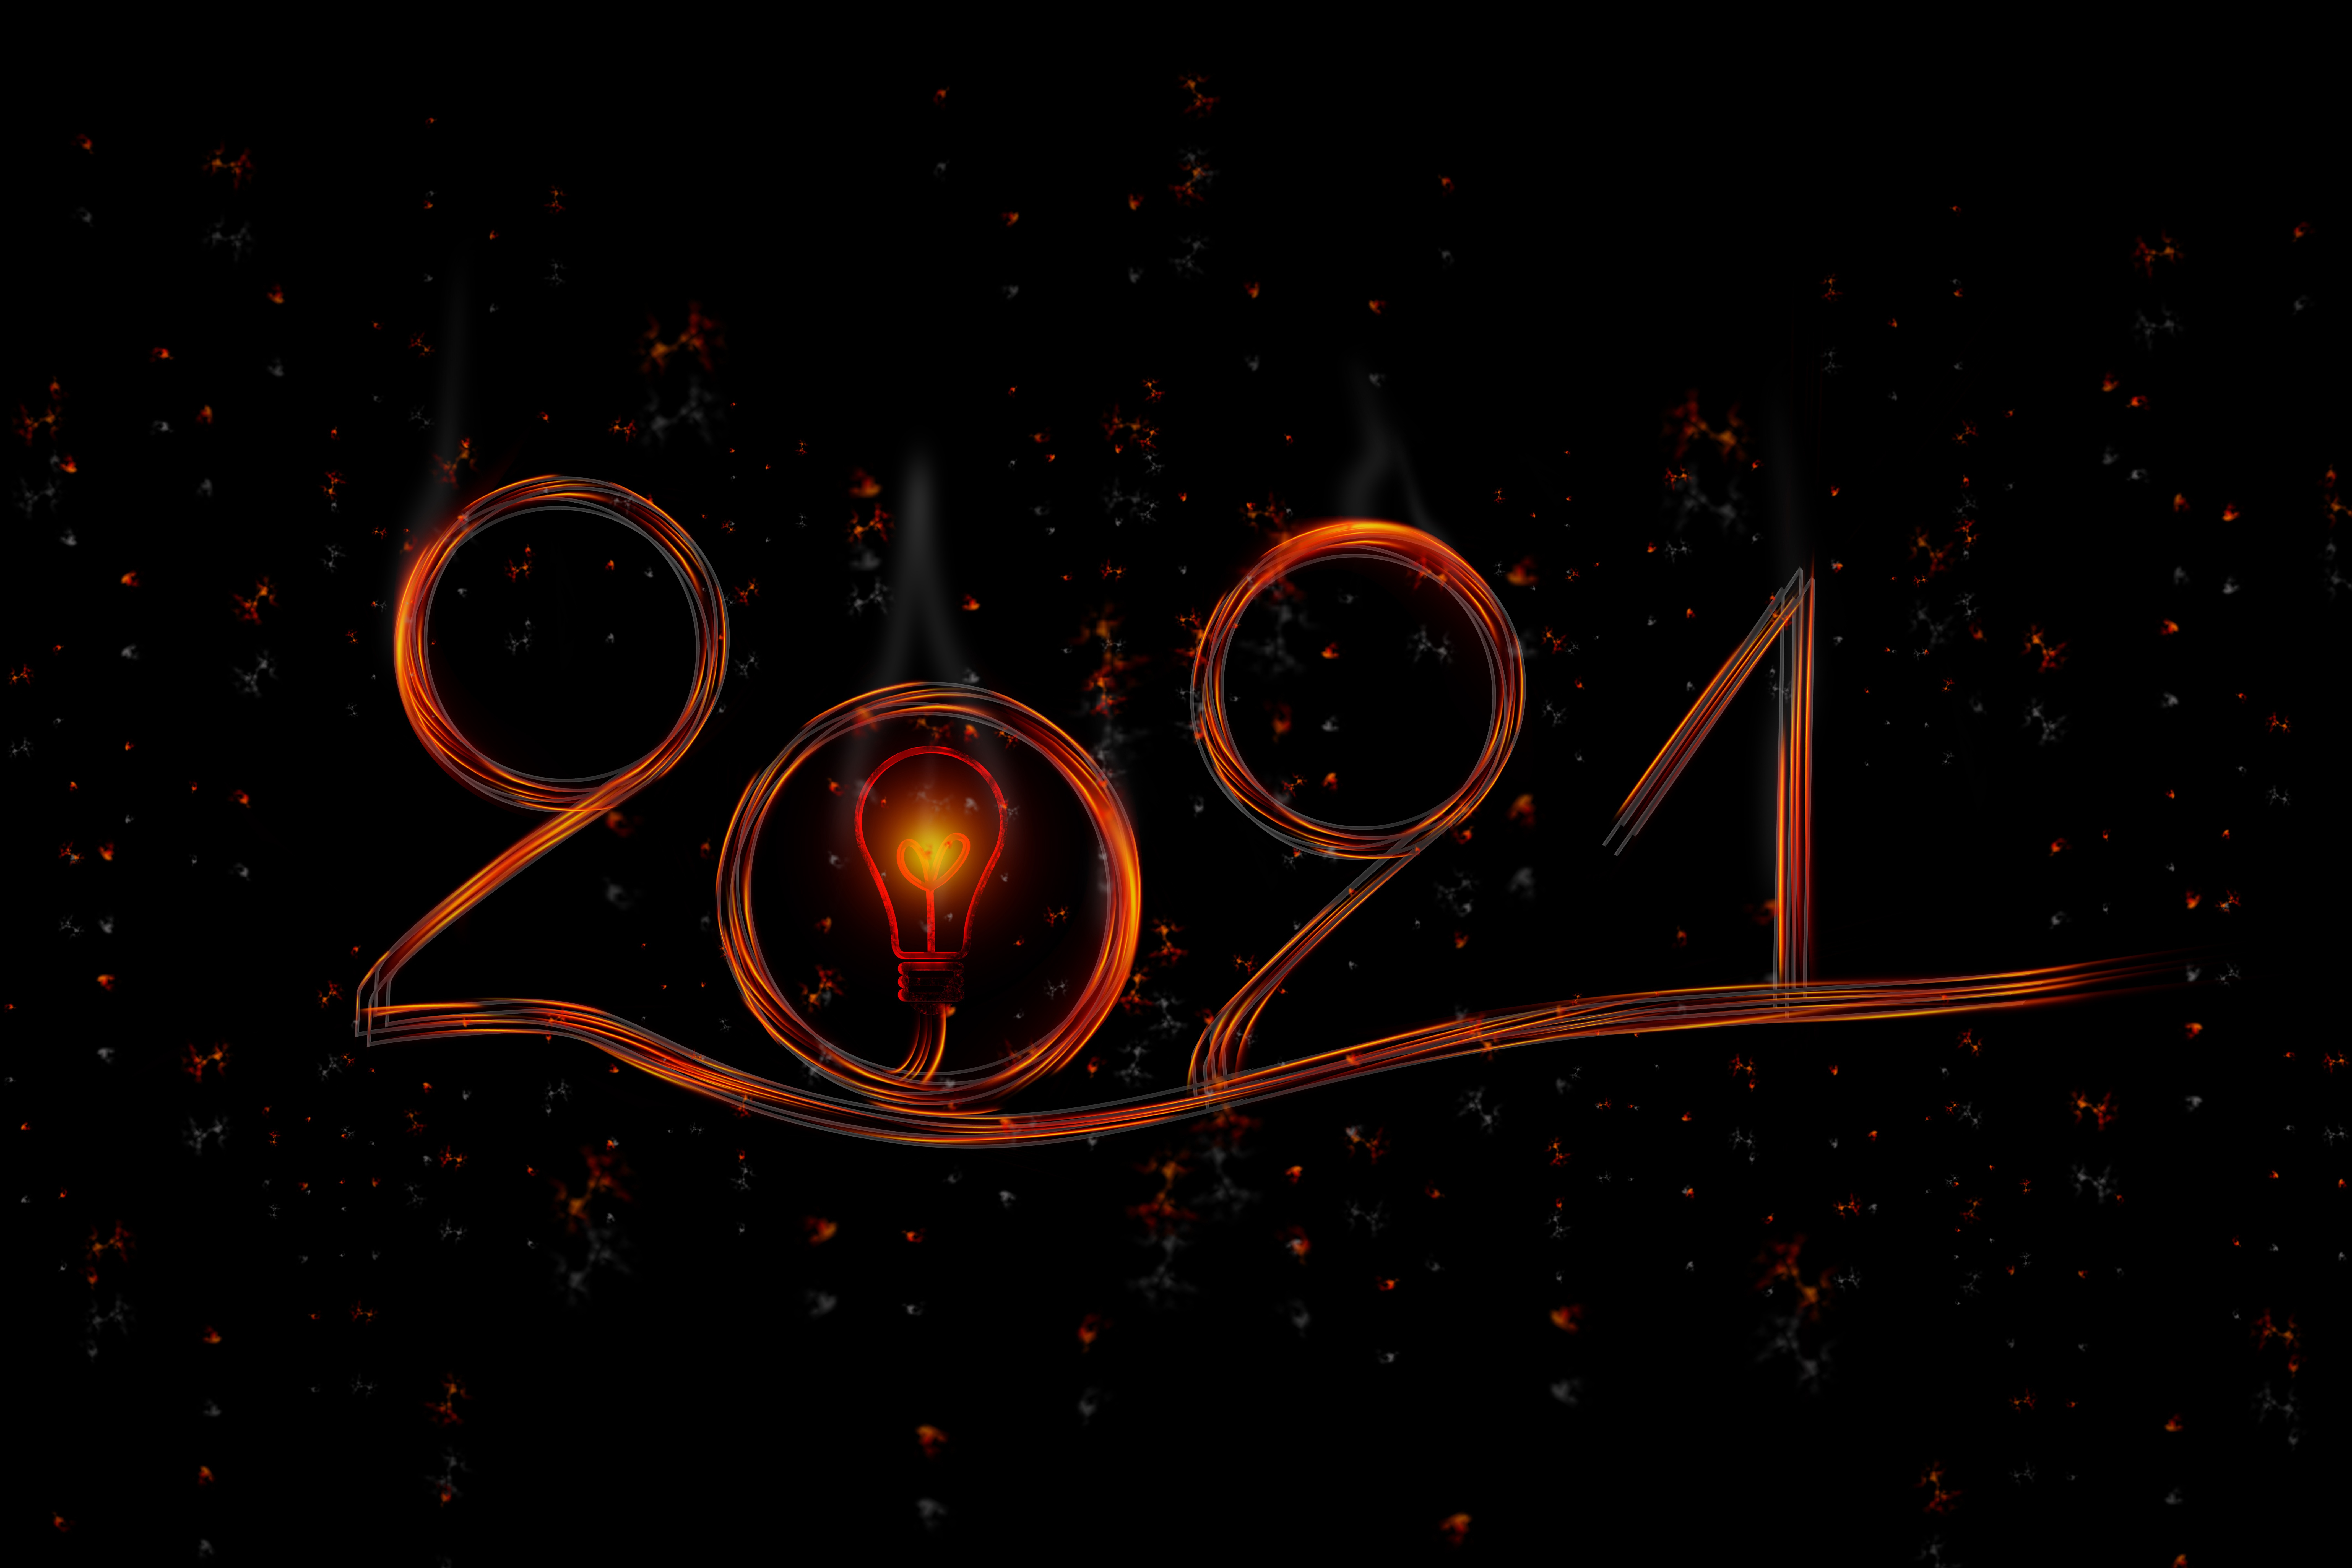 2021 New Year Wallpapers